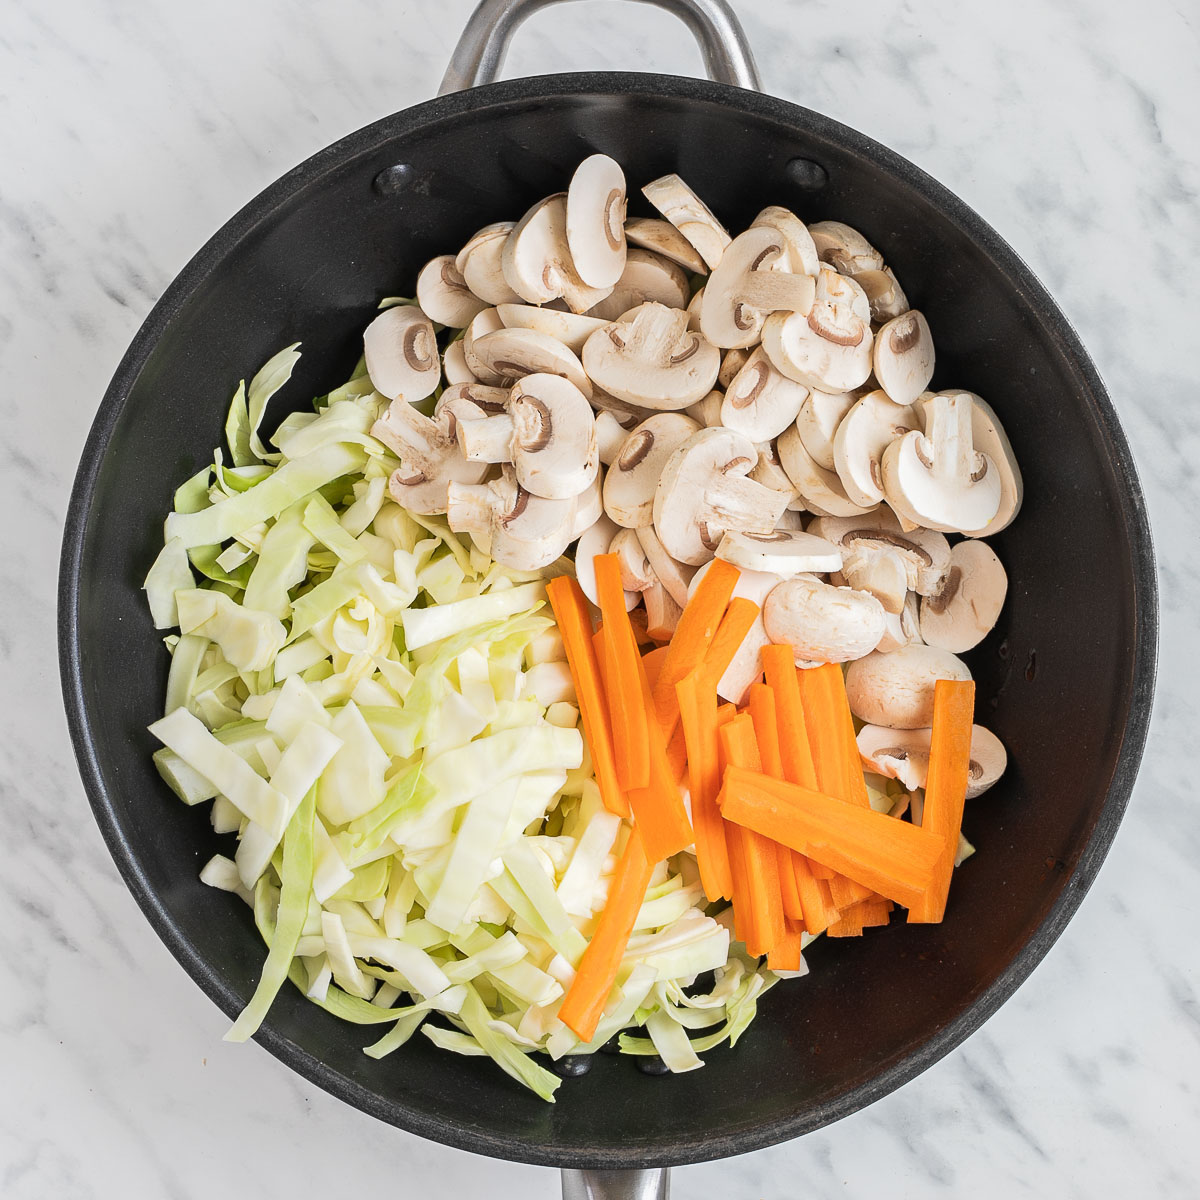 A wok with sliced mushrooms, shredded cabbage and sliced carrots.